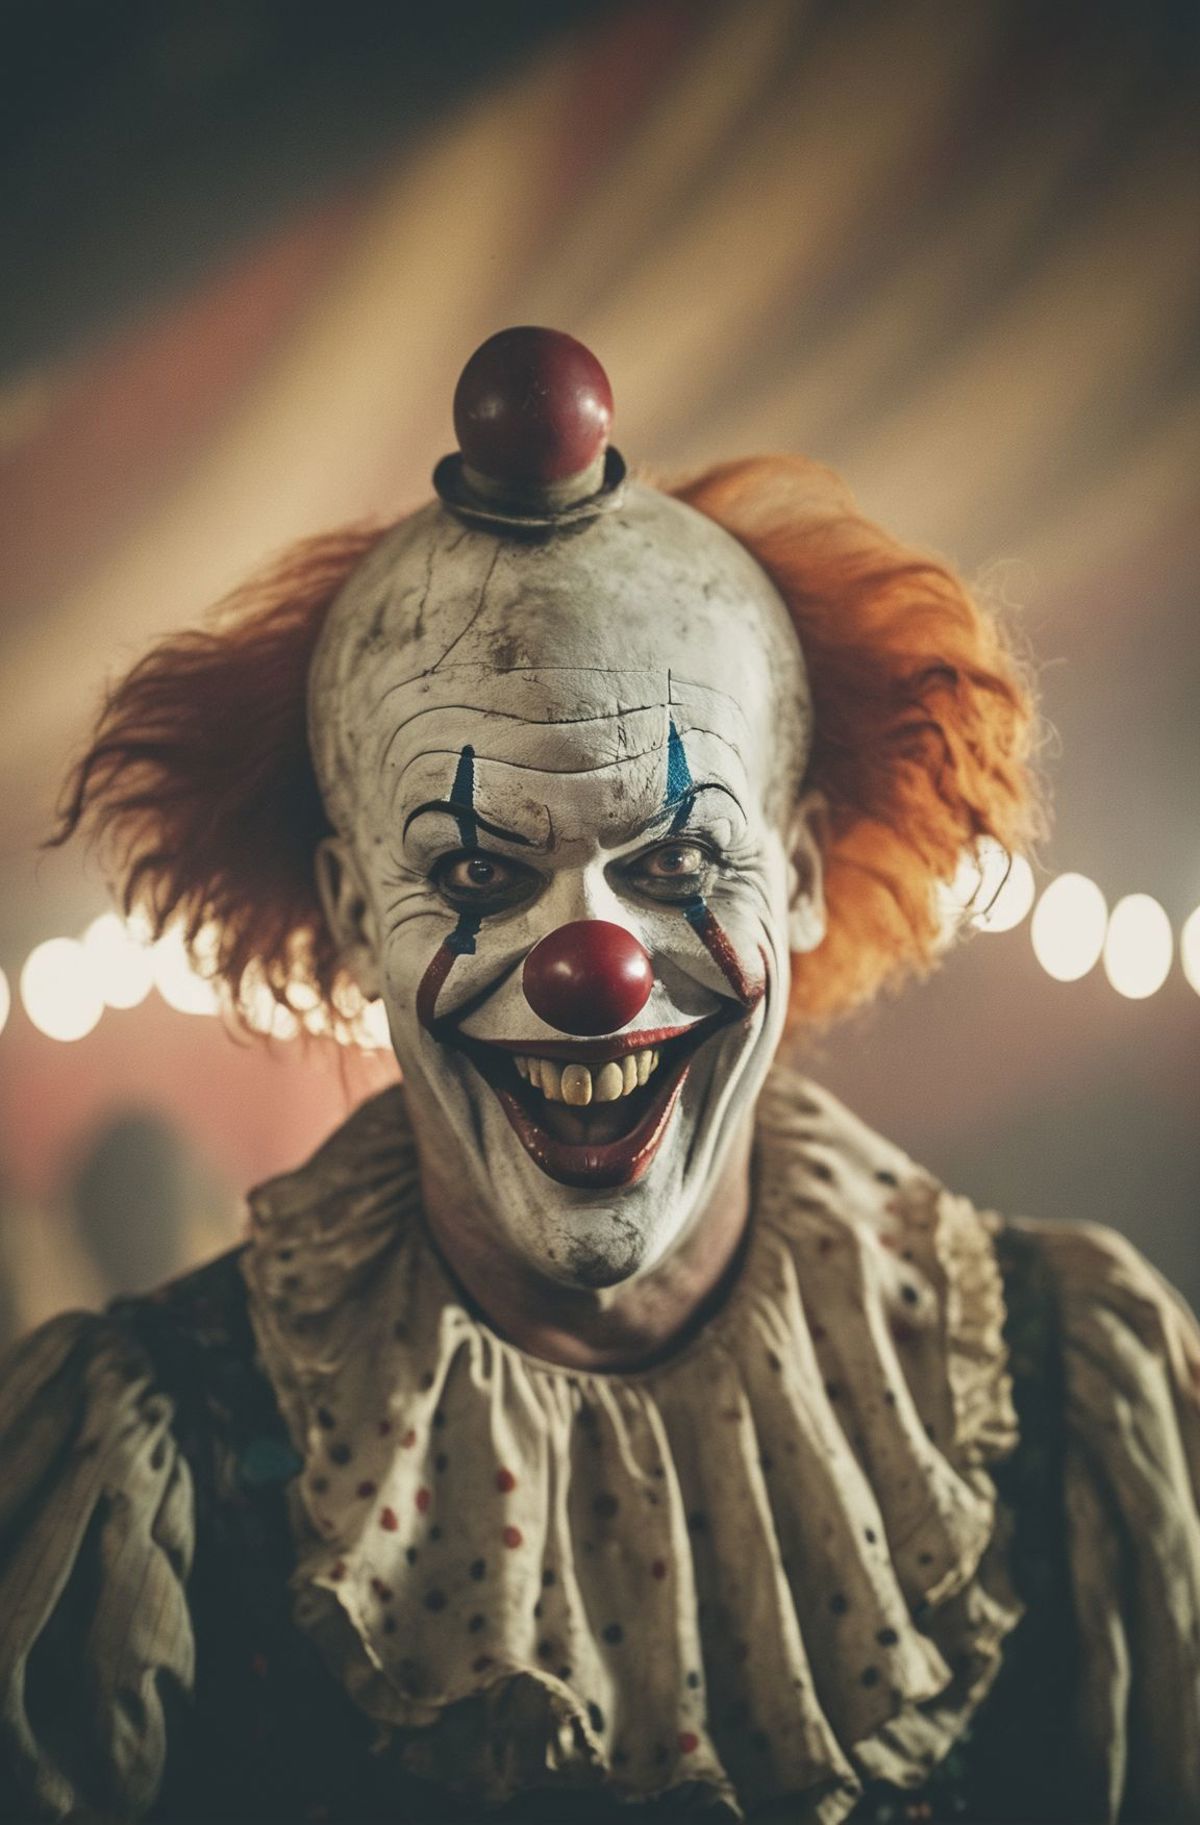 A clown wearing a wig and a red nose is smiling.